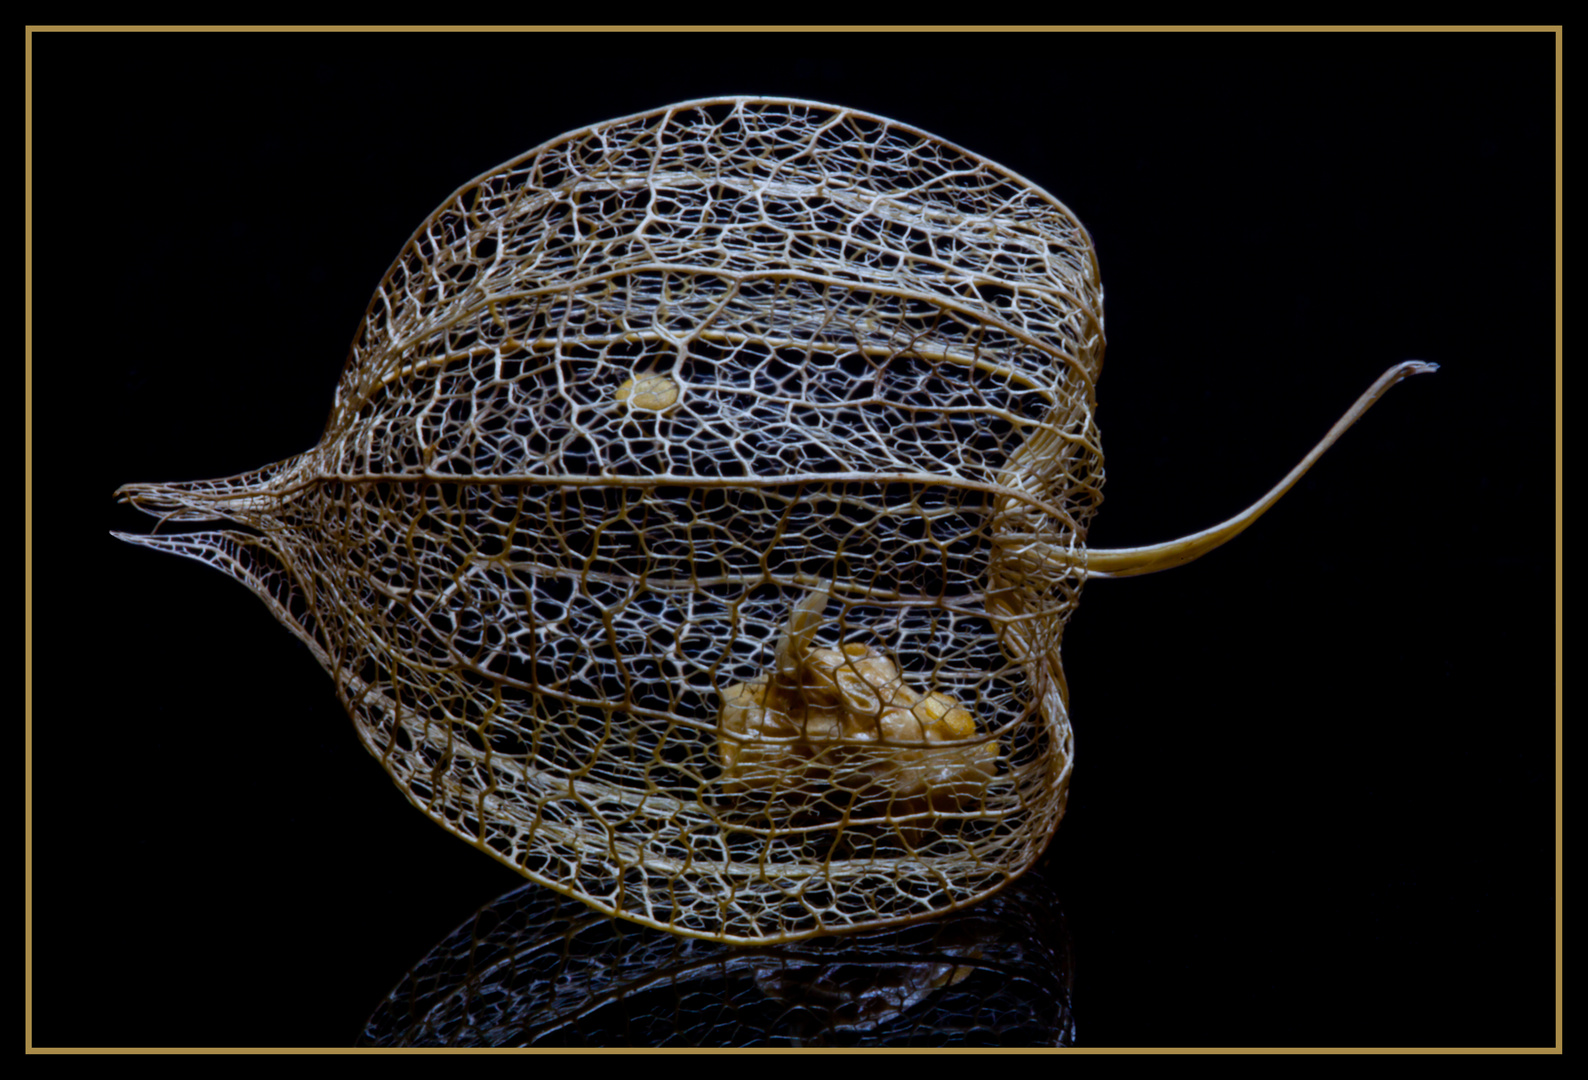 Physalis - Alles was blieb